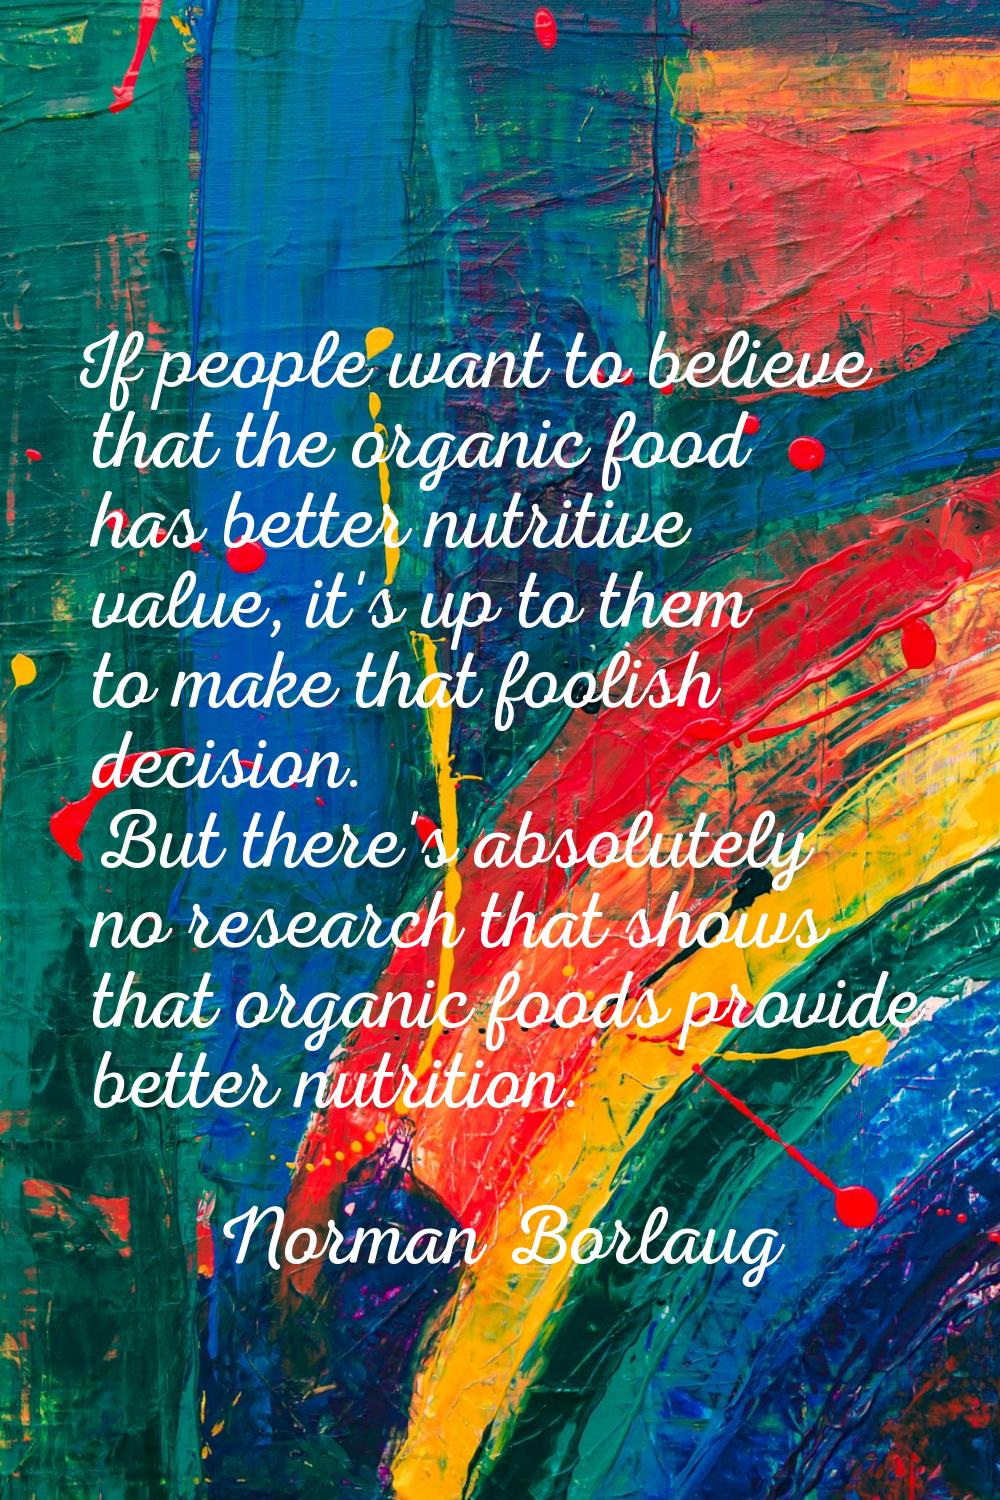 If people want to believe that the organic food has better nutritive value, it's up to them to make